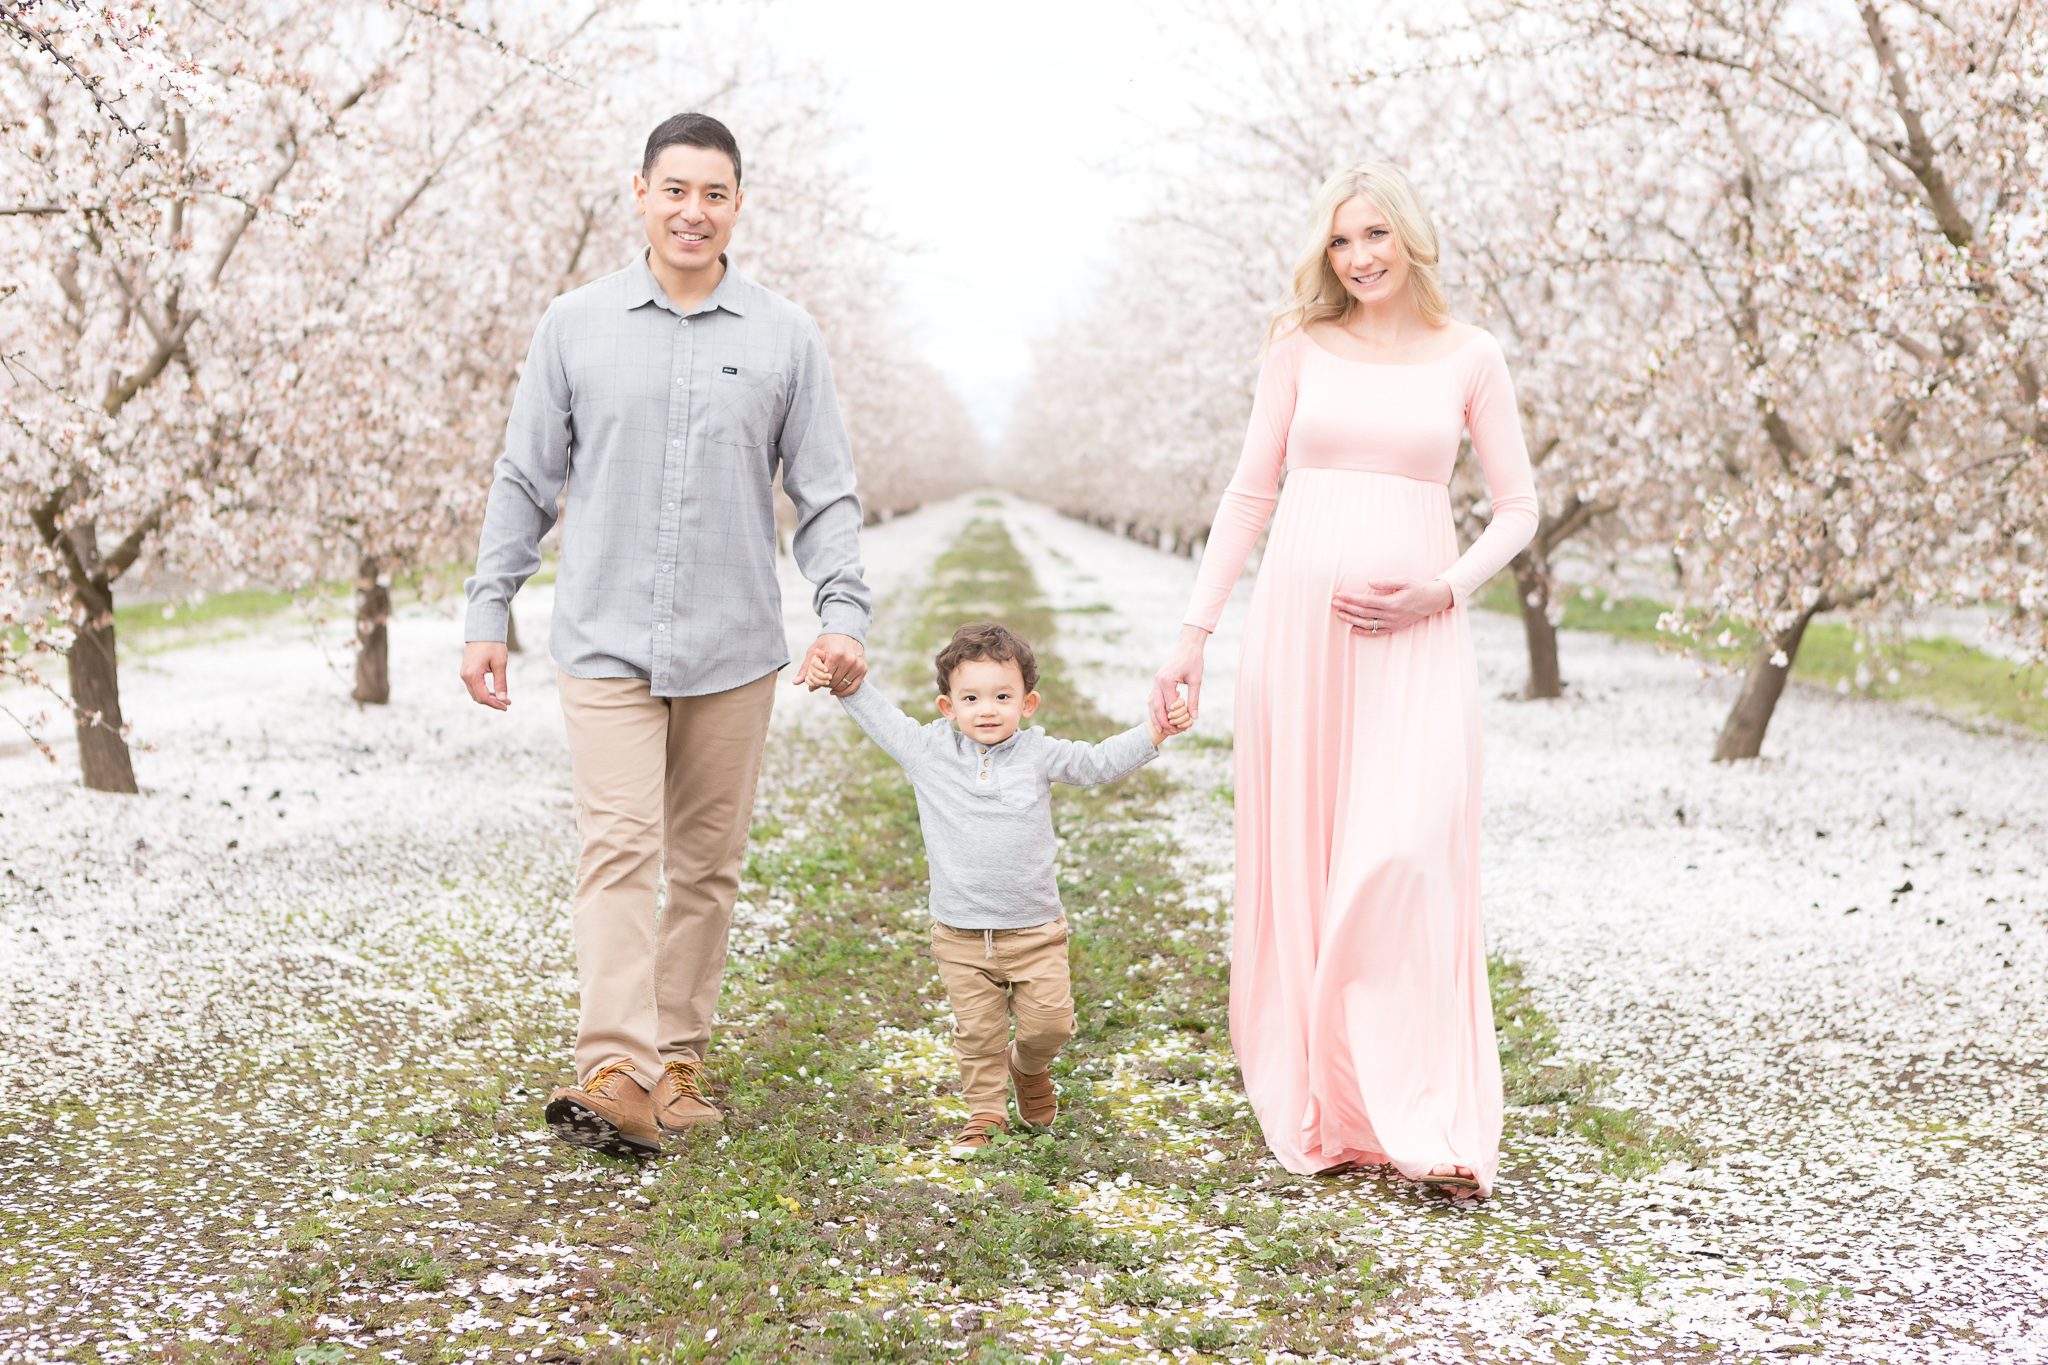 pink maternity dress, maternity session, mom dad and son walking in the blossoms 